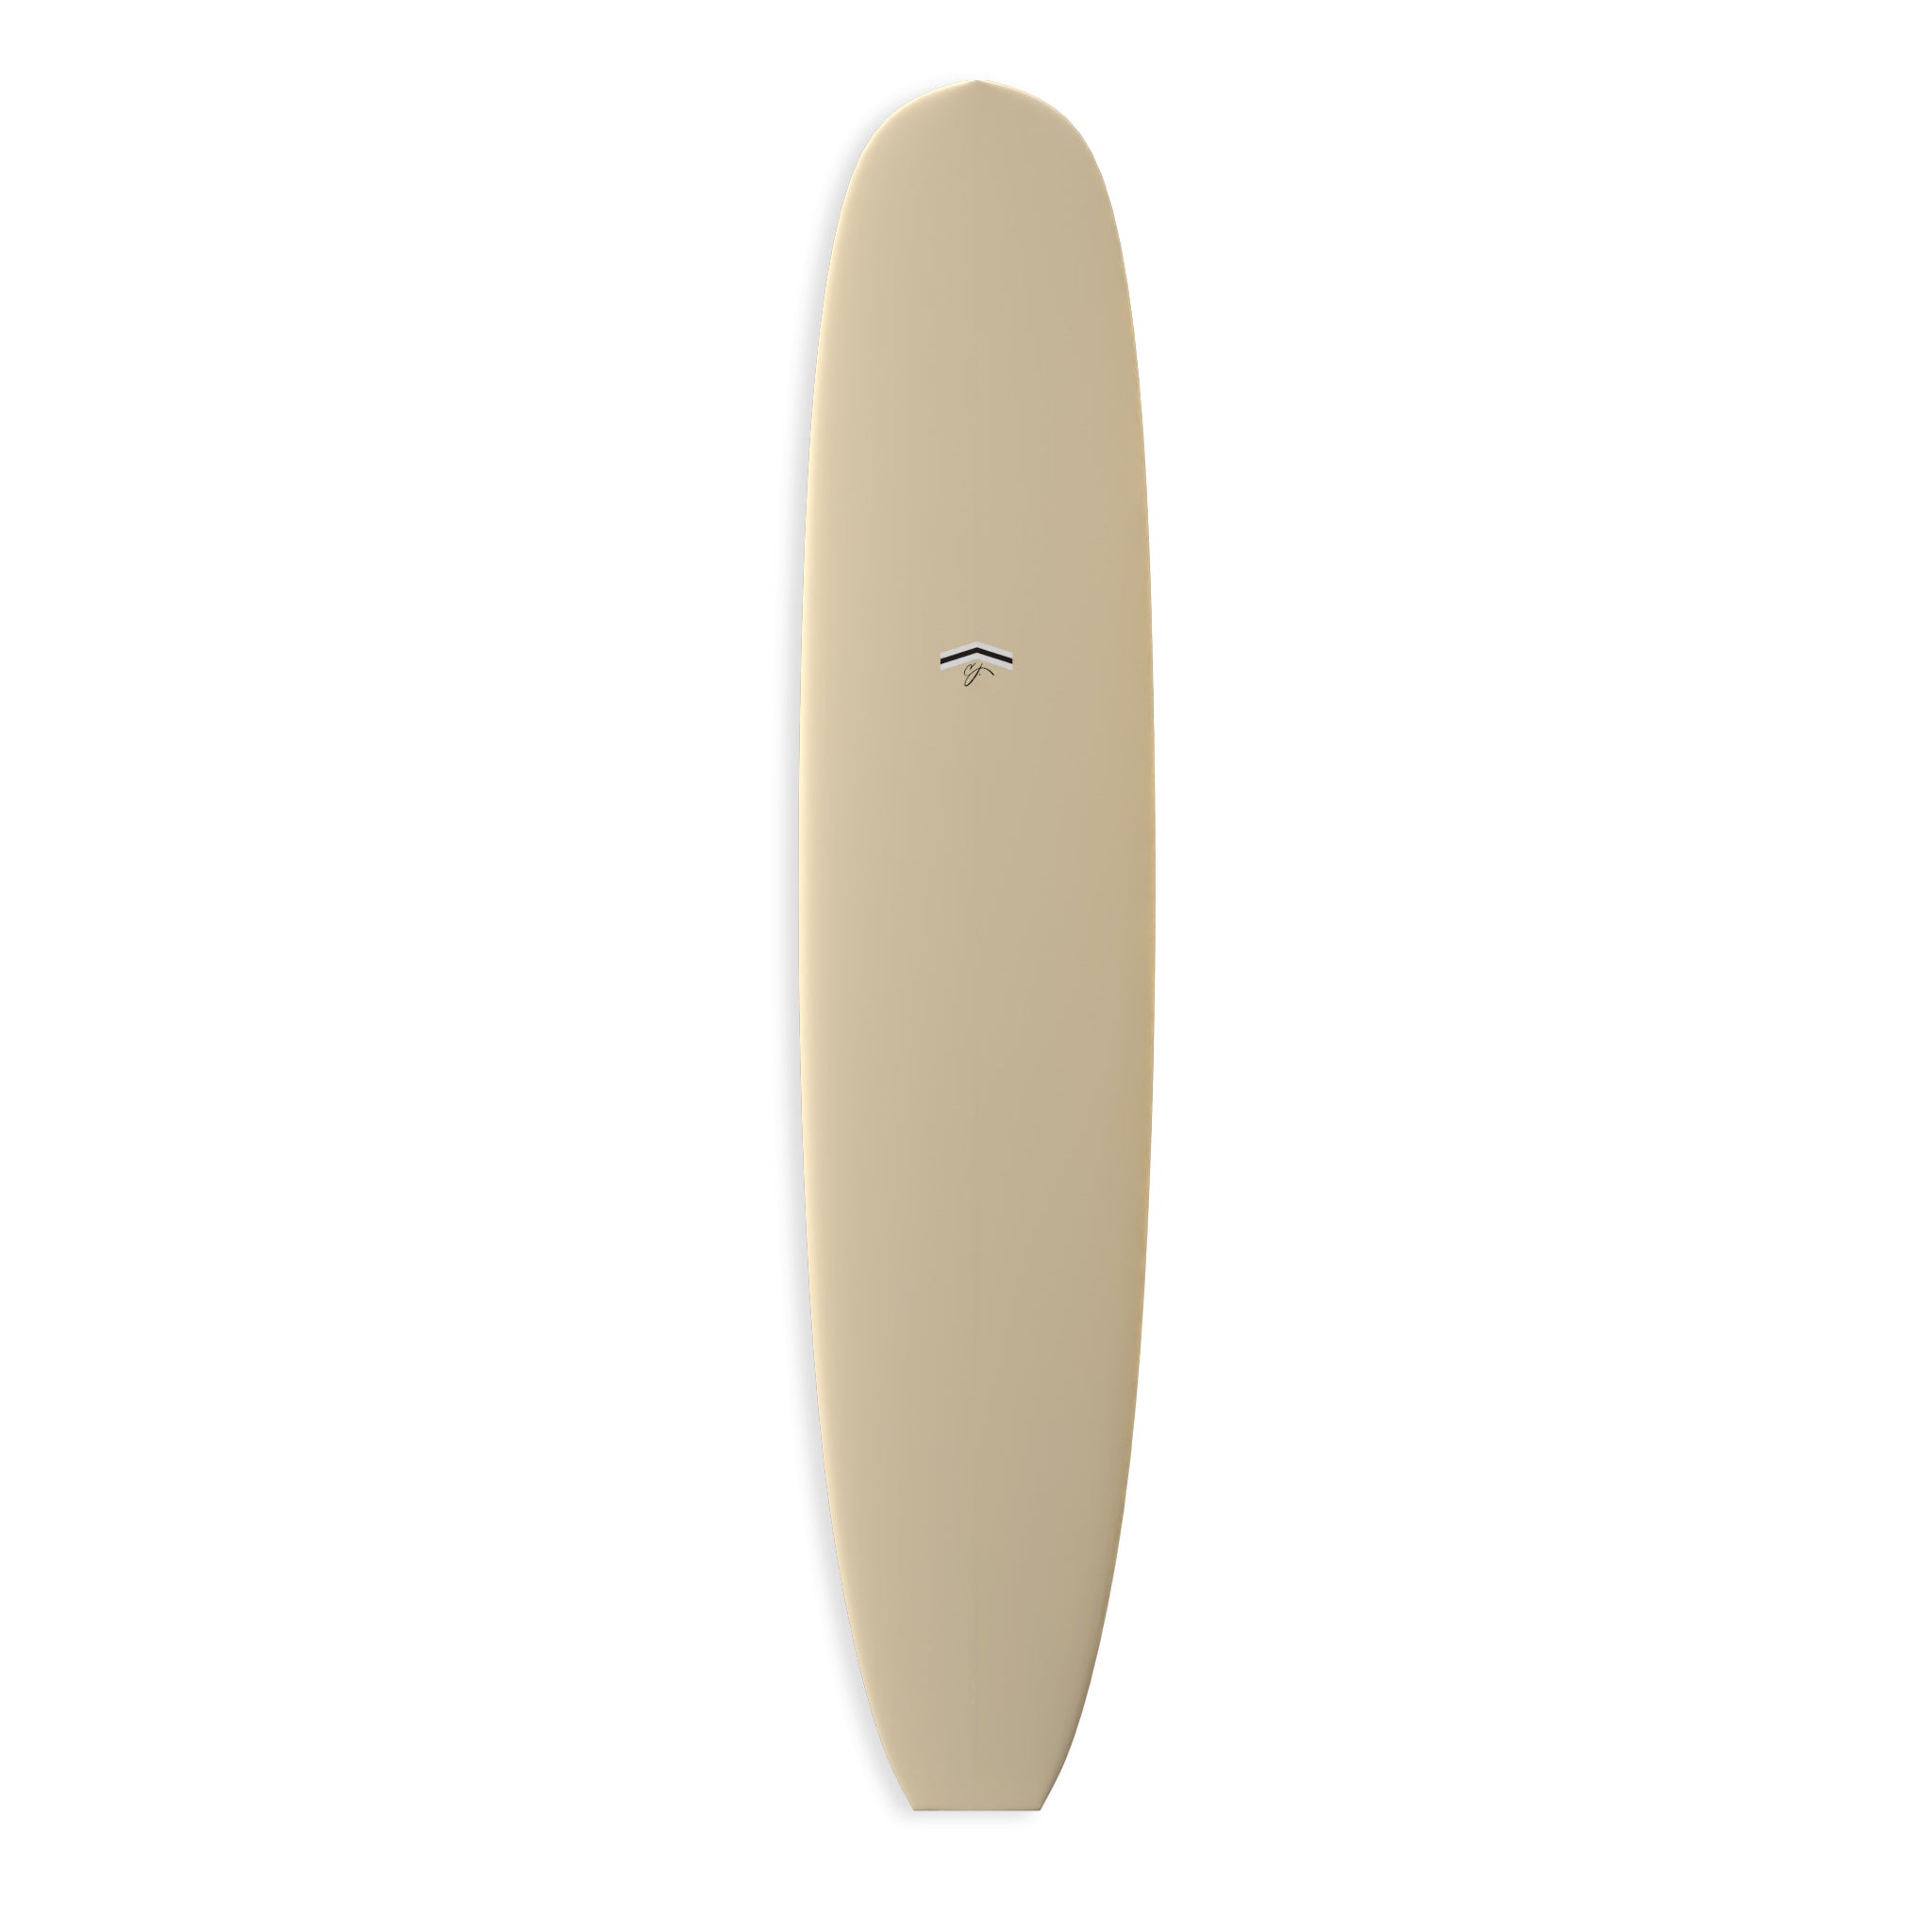 Firewire Surfboards Sprout